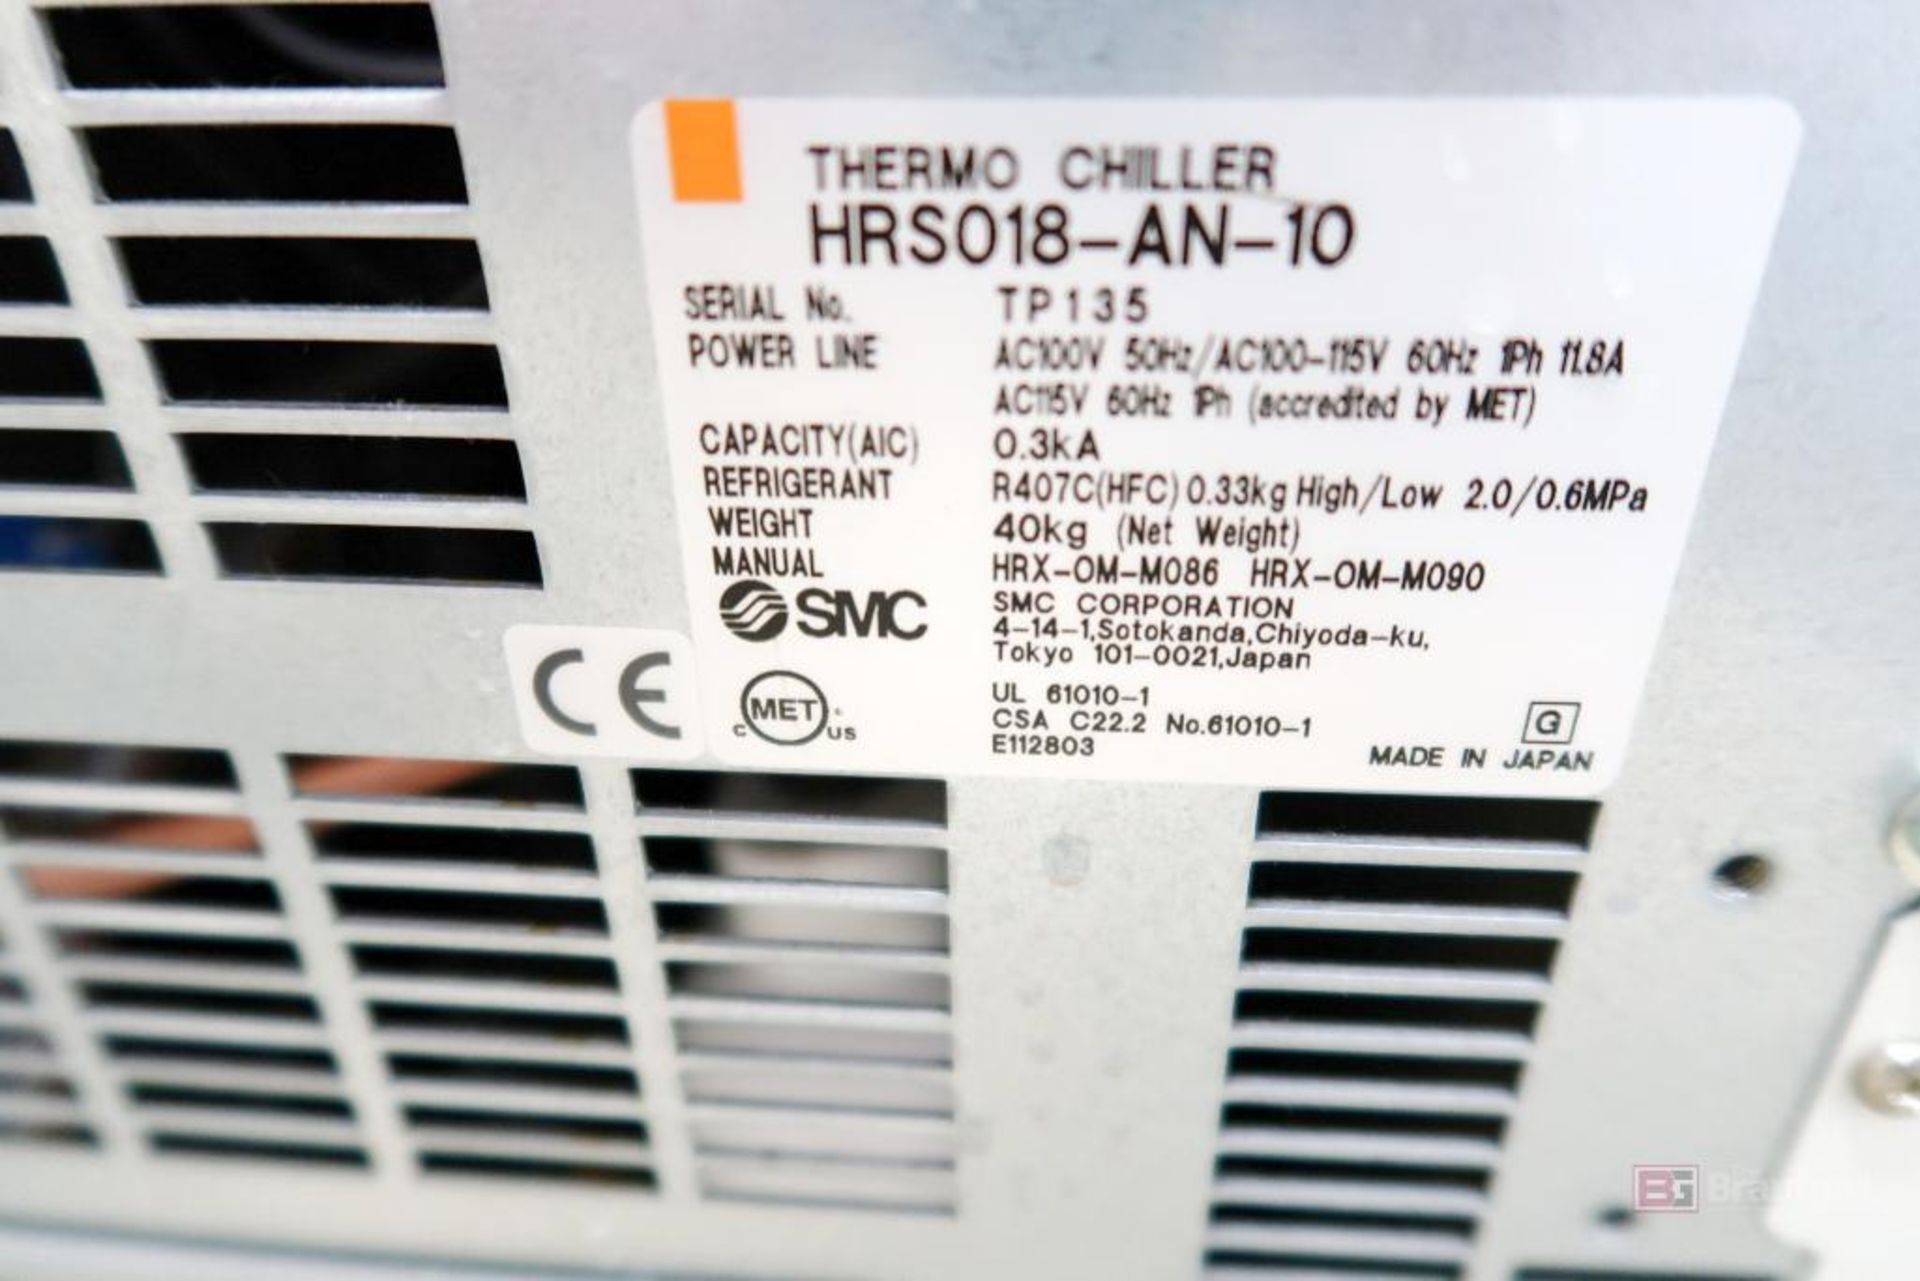 Thermo Chiller - Image 3 of 3